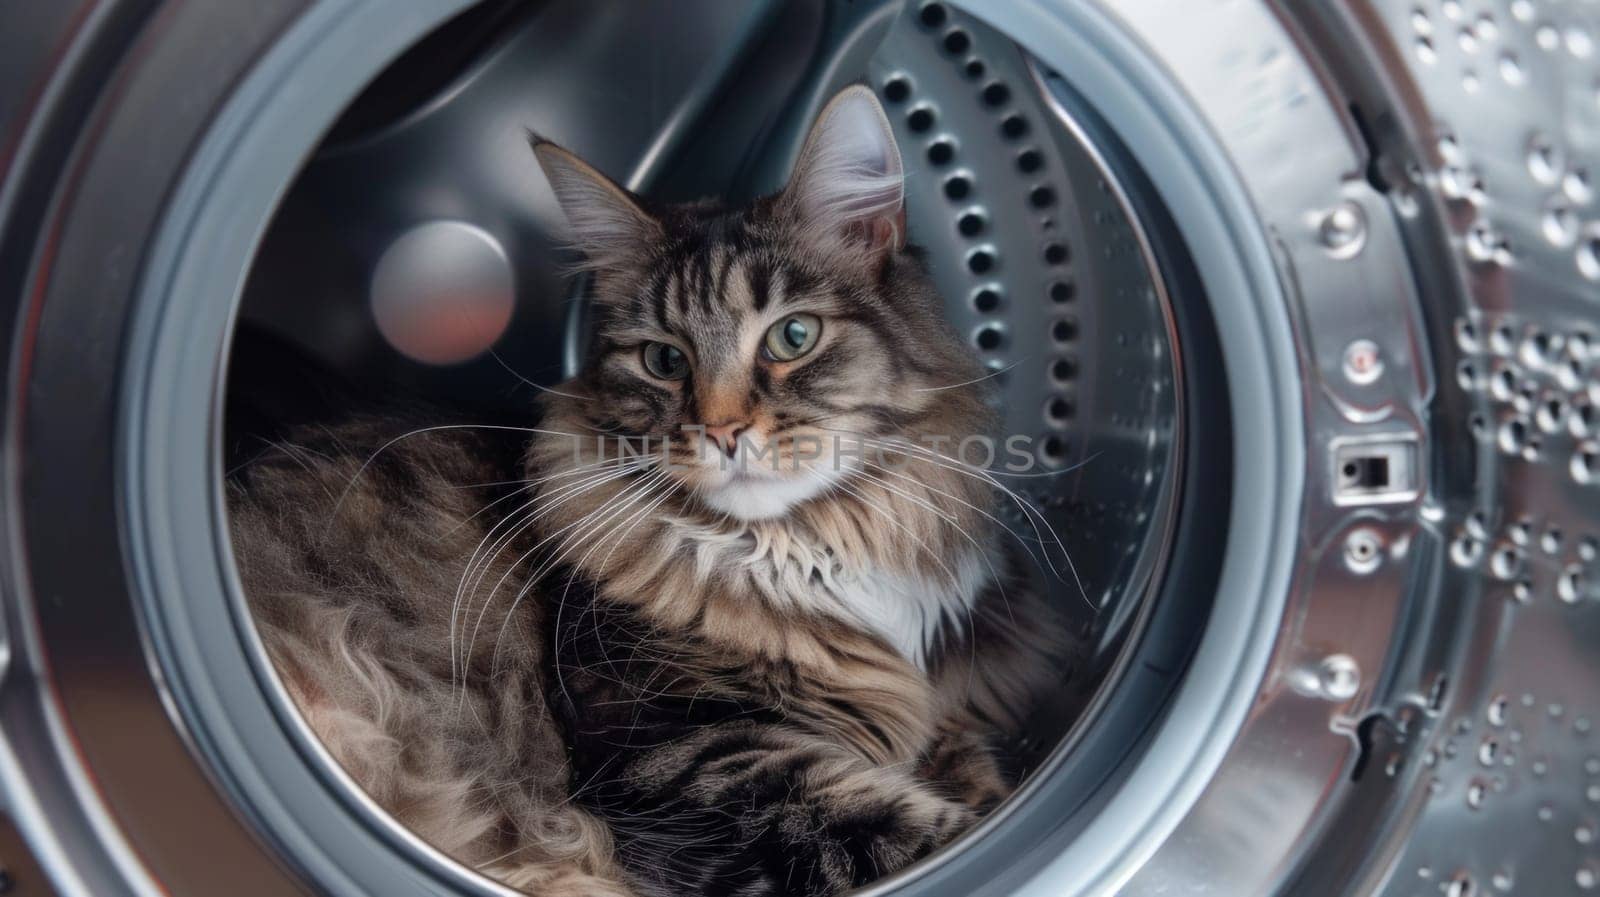 A fluffy cat comfortably nestled inside the drum of a washing machine, looking out curiously at its surroundings.